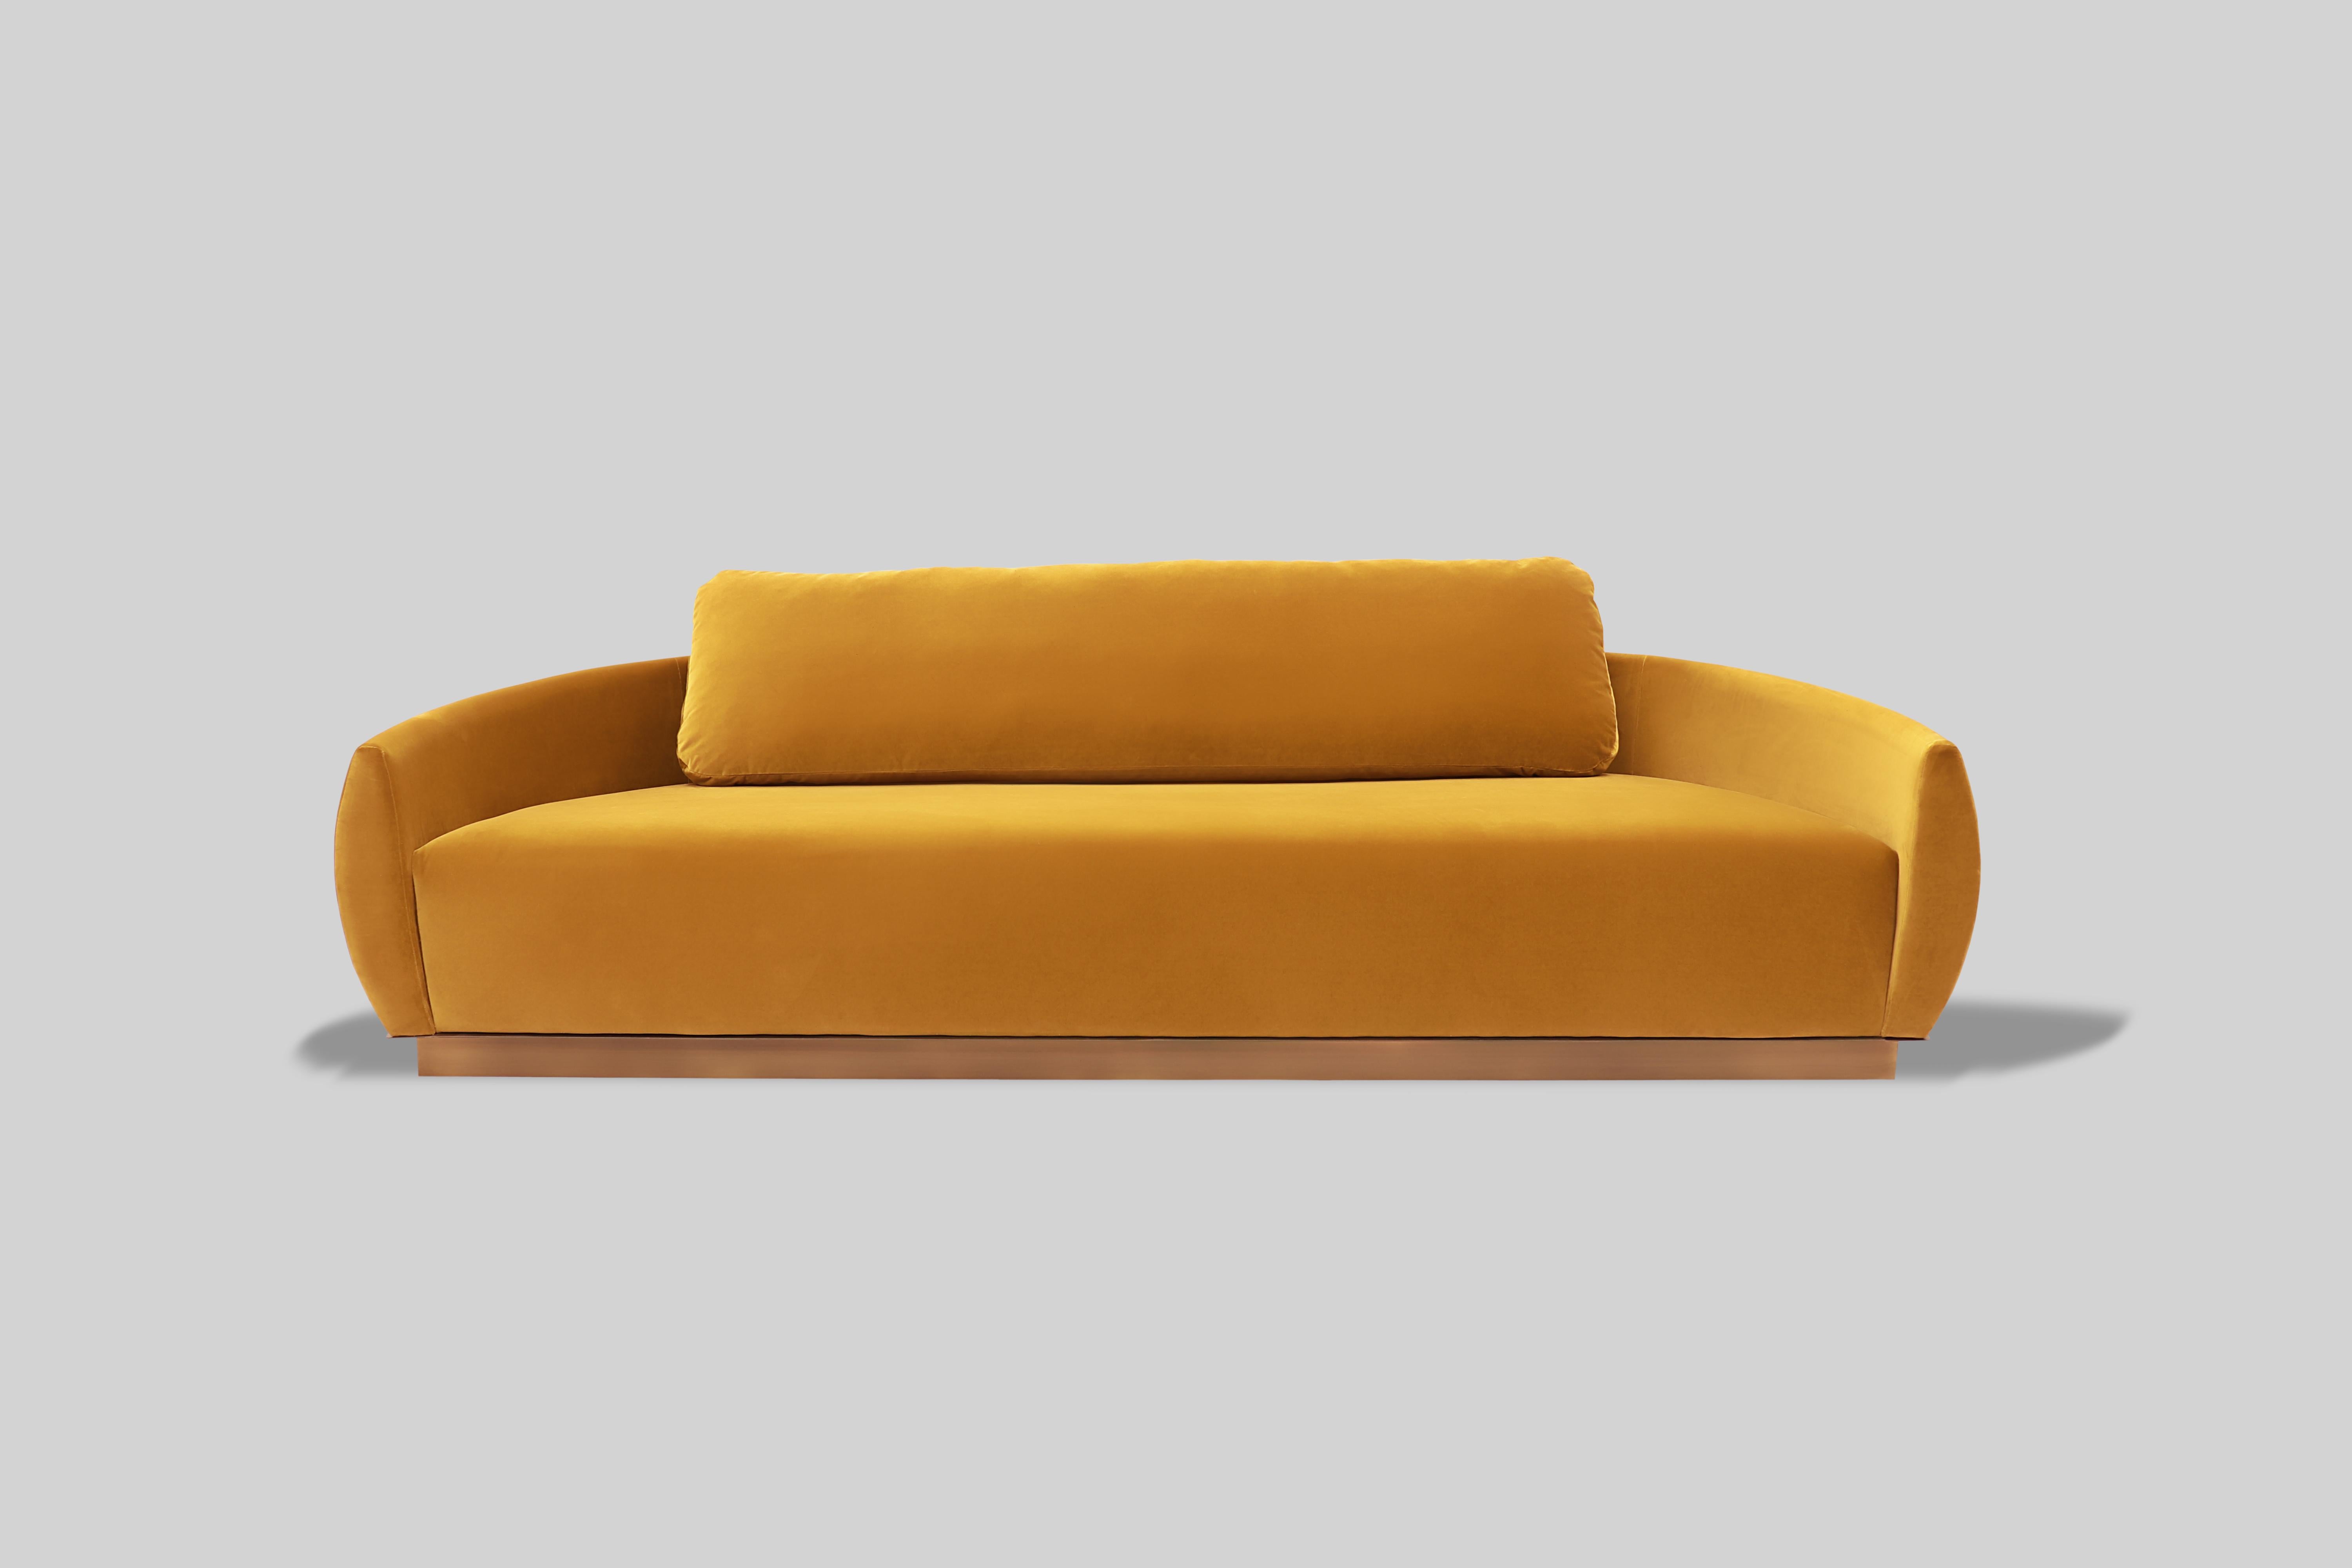 Egge Sofa by Atra Design
Dimensions: D 250 x W 956 x H 62.4 cm.
Materials: Brass and velvet fabric upholstery.

Different fabric options available. Please contact us. 

Atra Design
We are Atra, a furniture brand produced by Atra form a mexico